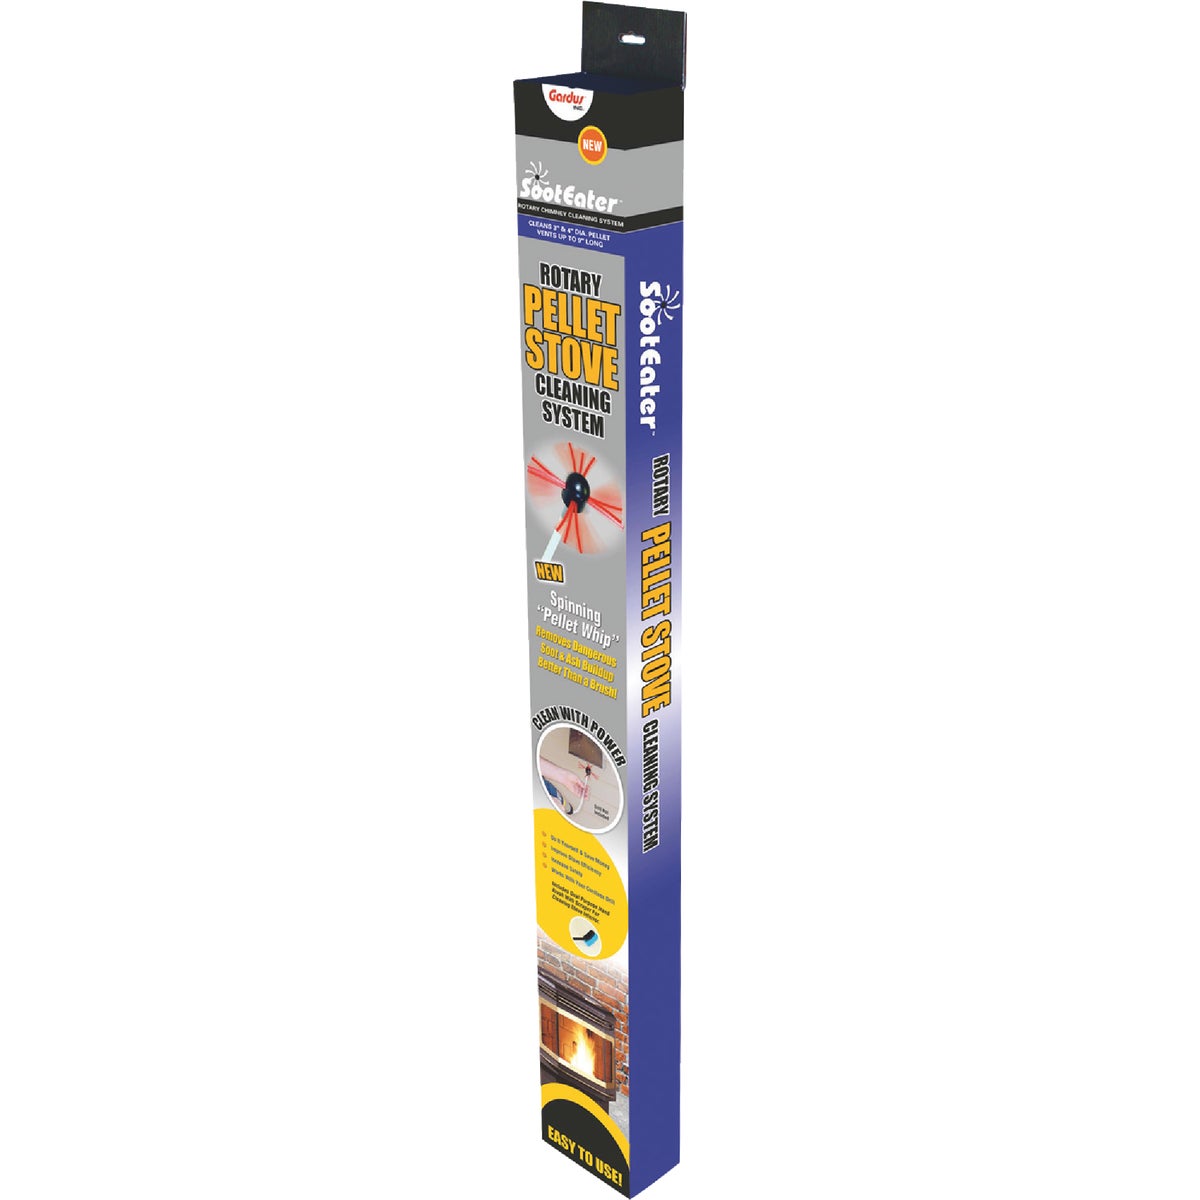 Item 454895, SootEater rotary pellet stove cleaning system cleans pellet stoves and pipe